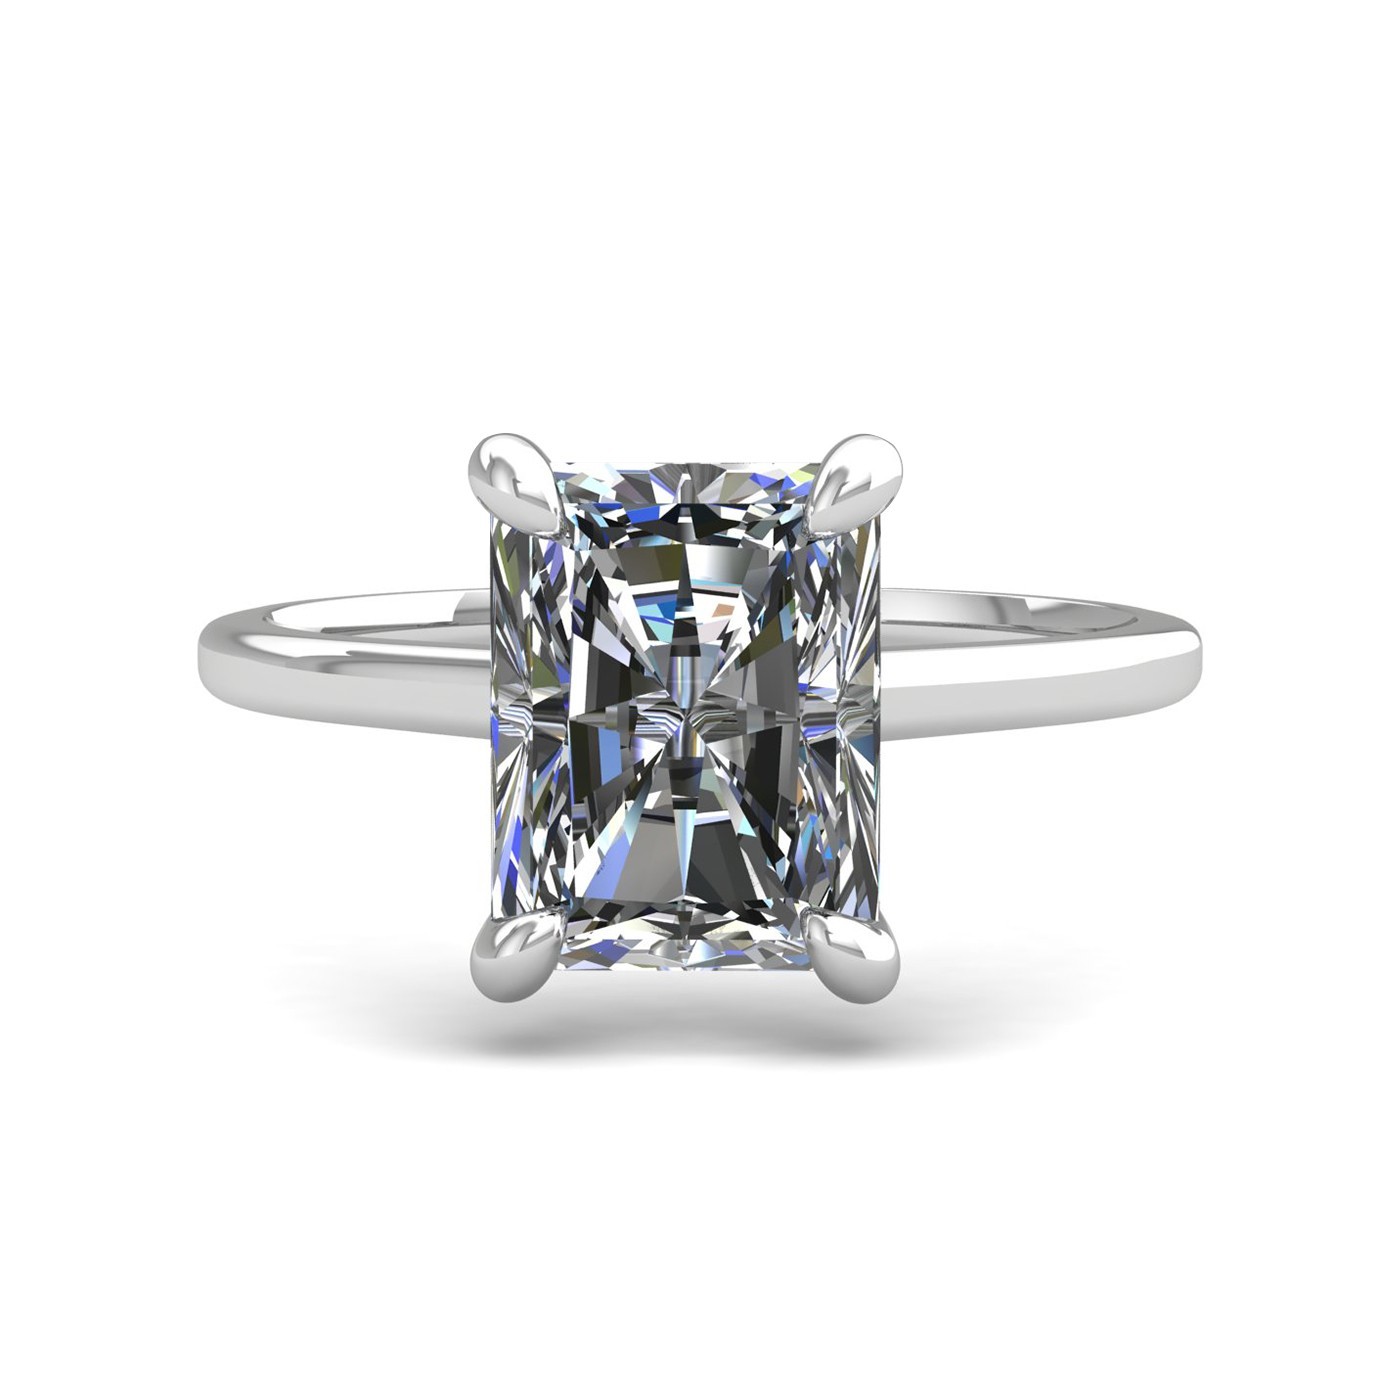 18k white gold  2,00 ct 4 prongs solitaire radiant cut diamond engagement ring with whisper thin band Photos & images